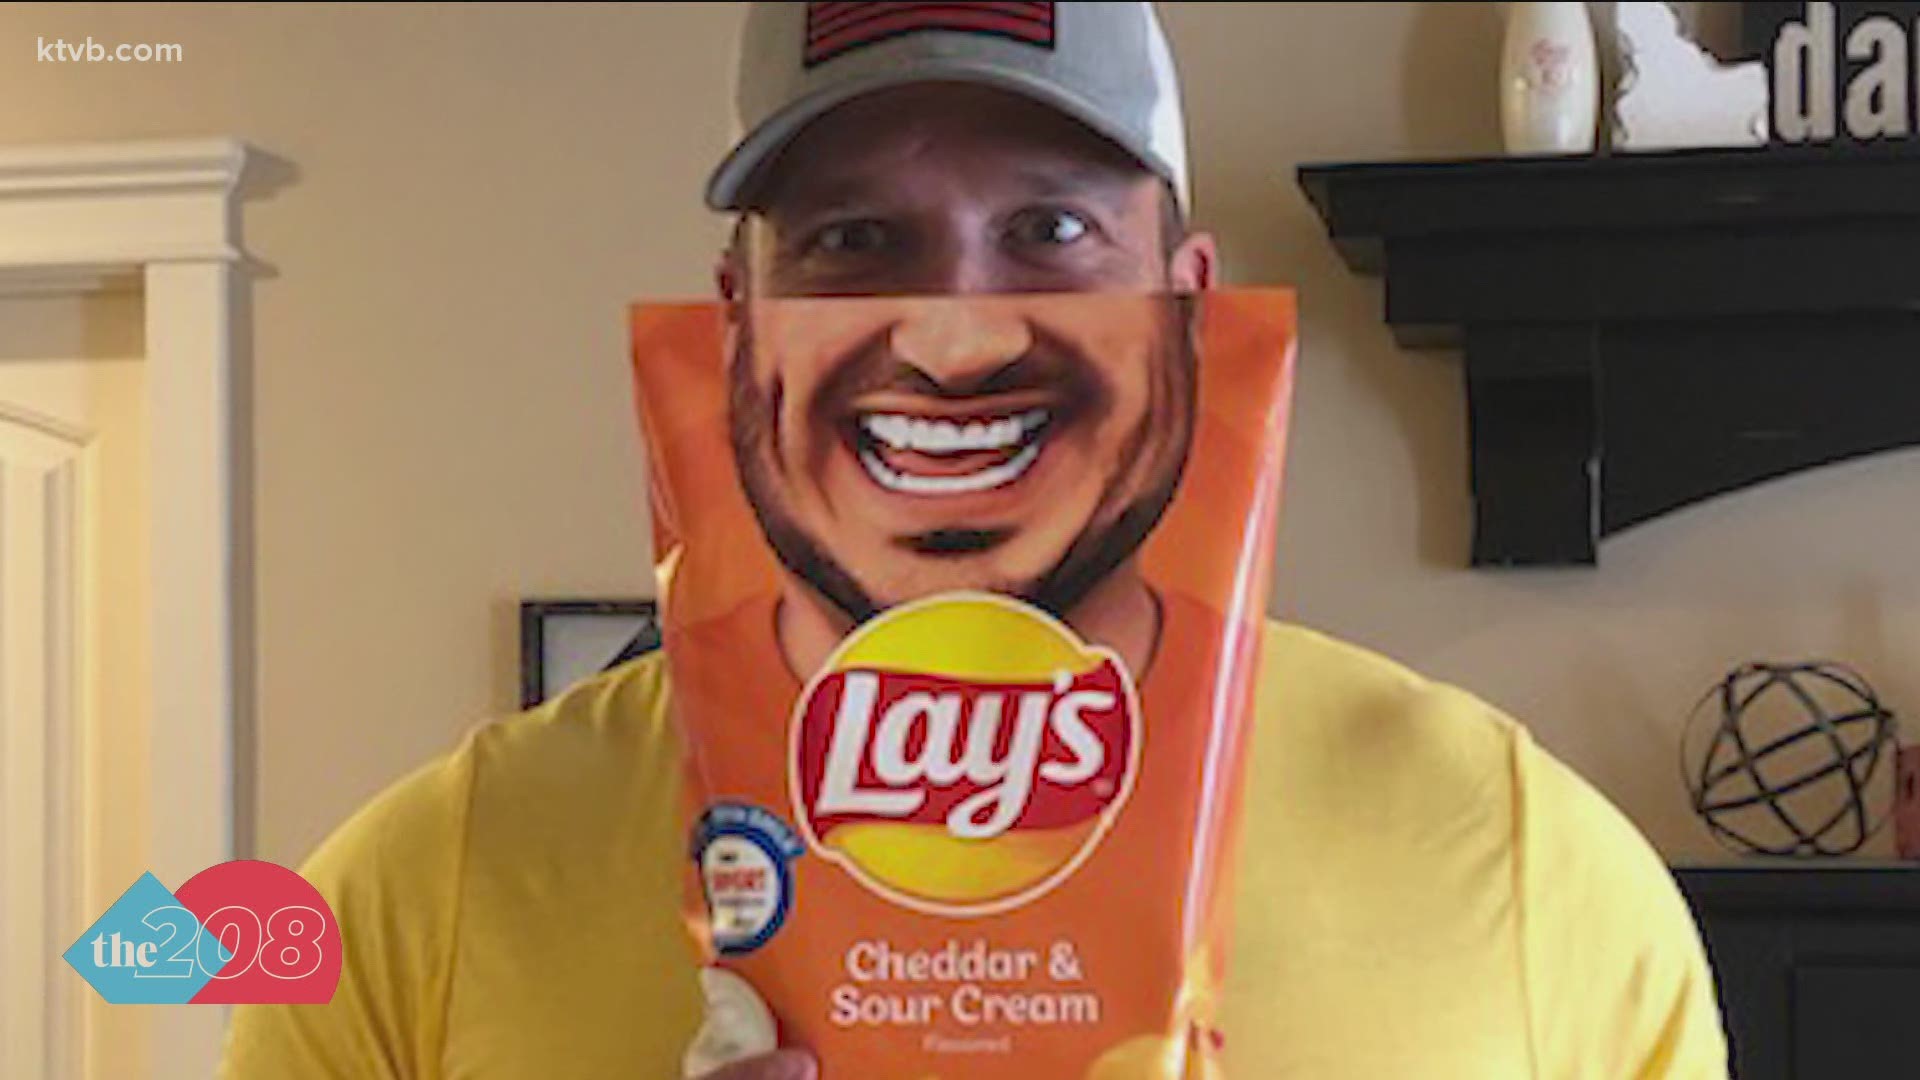 Luke Mickelson's charity to build beds for children in need will receive a portion of the potato chip sales.